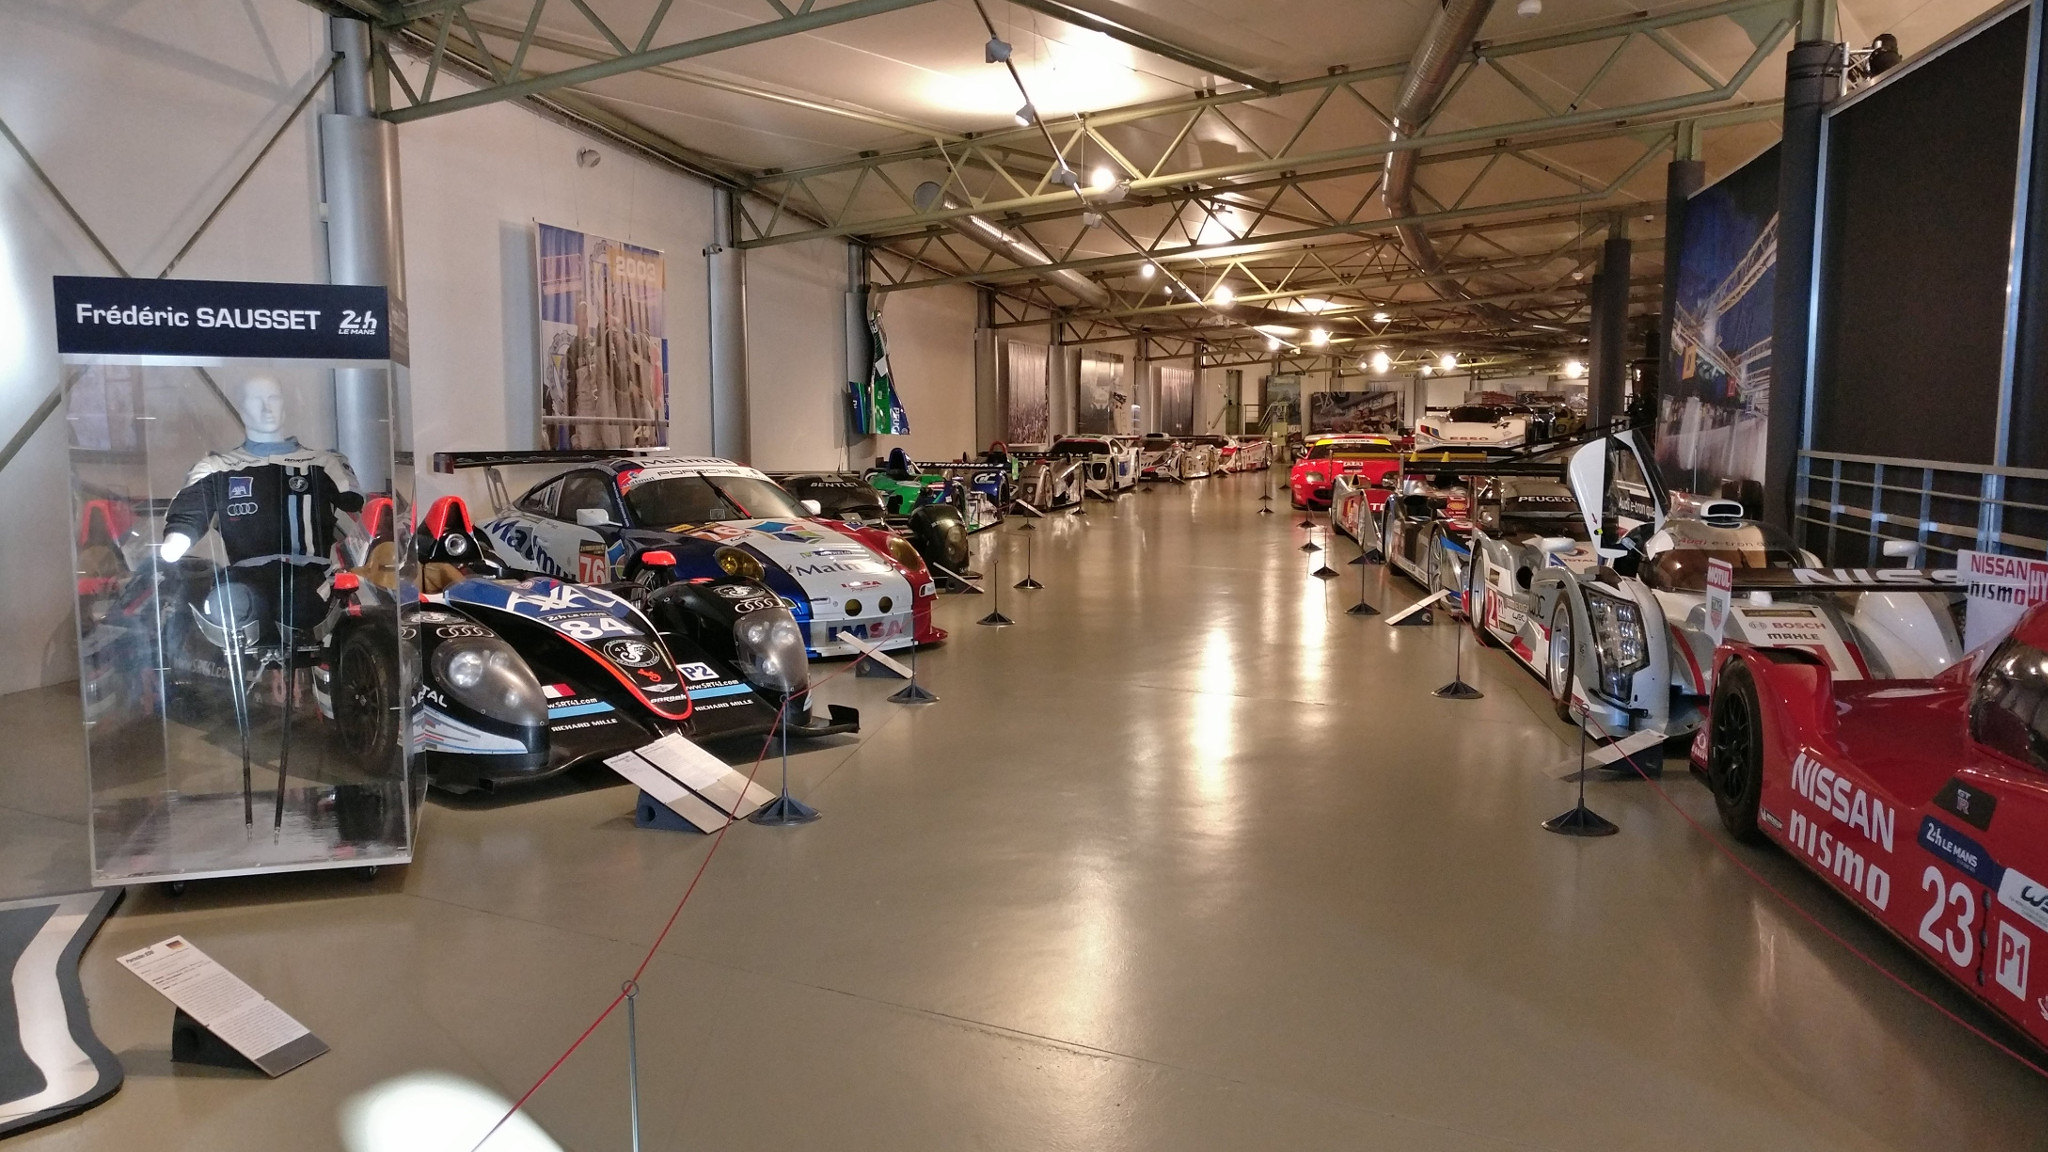 The last items in the collection of the Museum of the 24 Hours of Le Mans